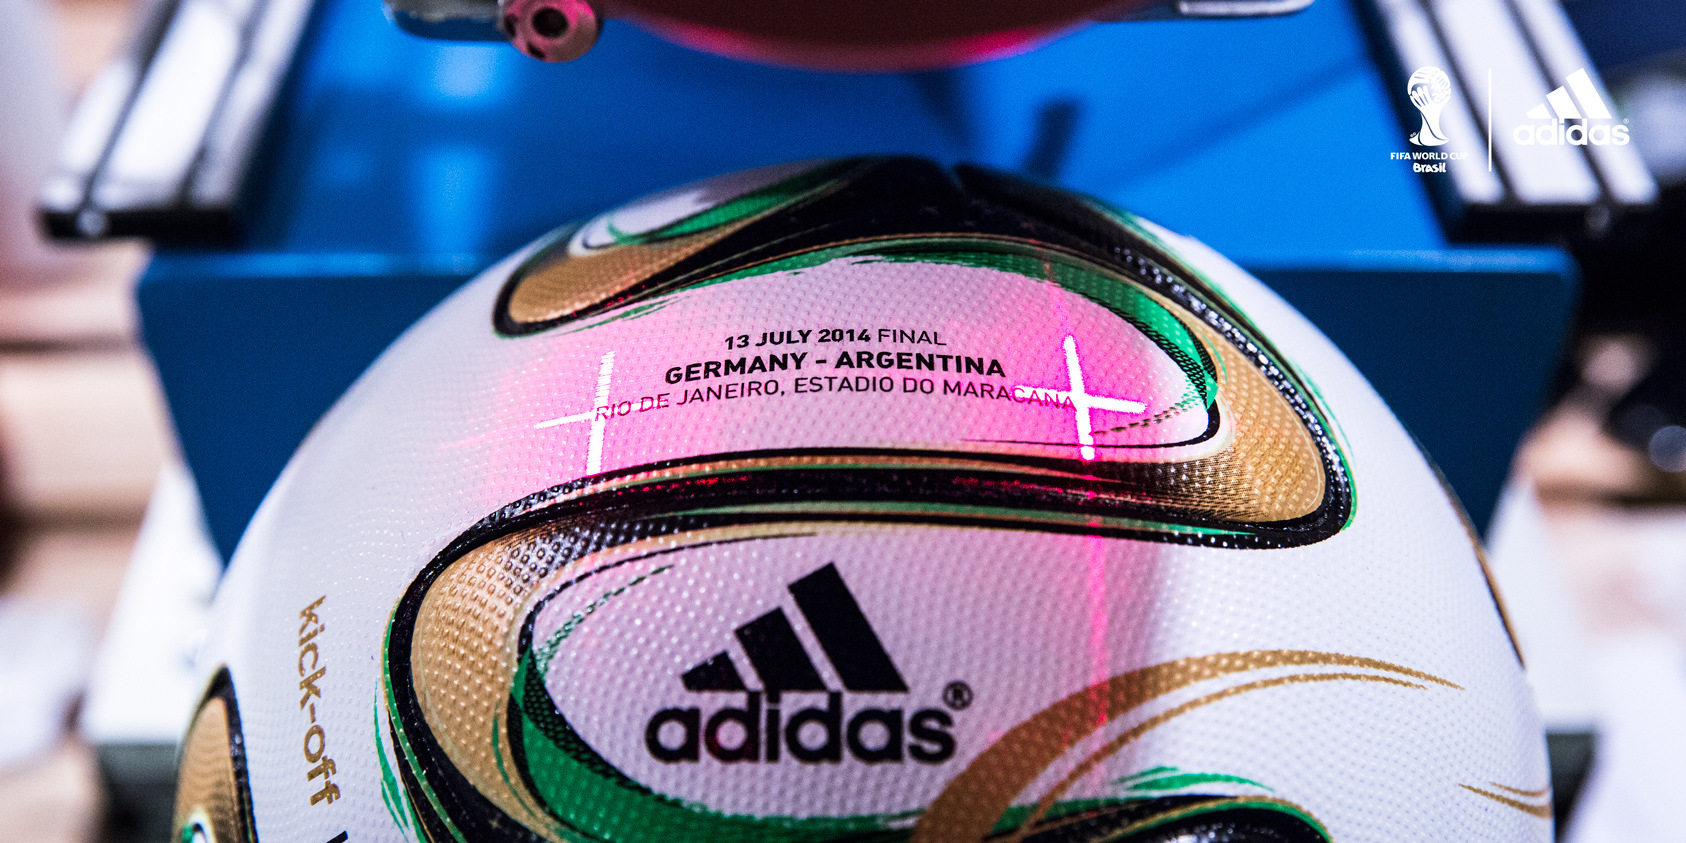 GERMANY VS ARGENTINA Adidas Brazuca Final Rio World Cup Official